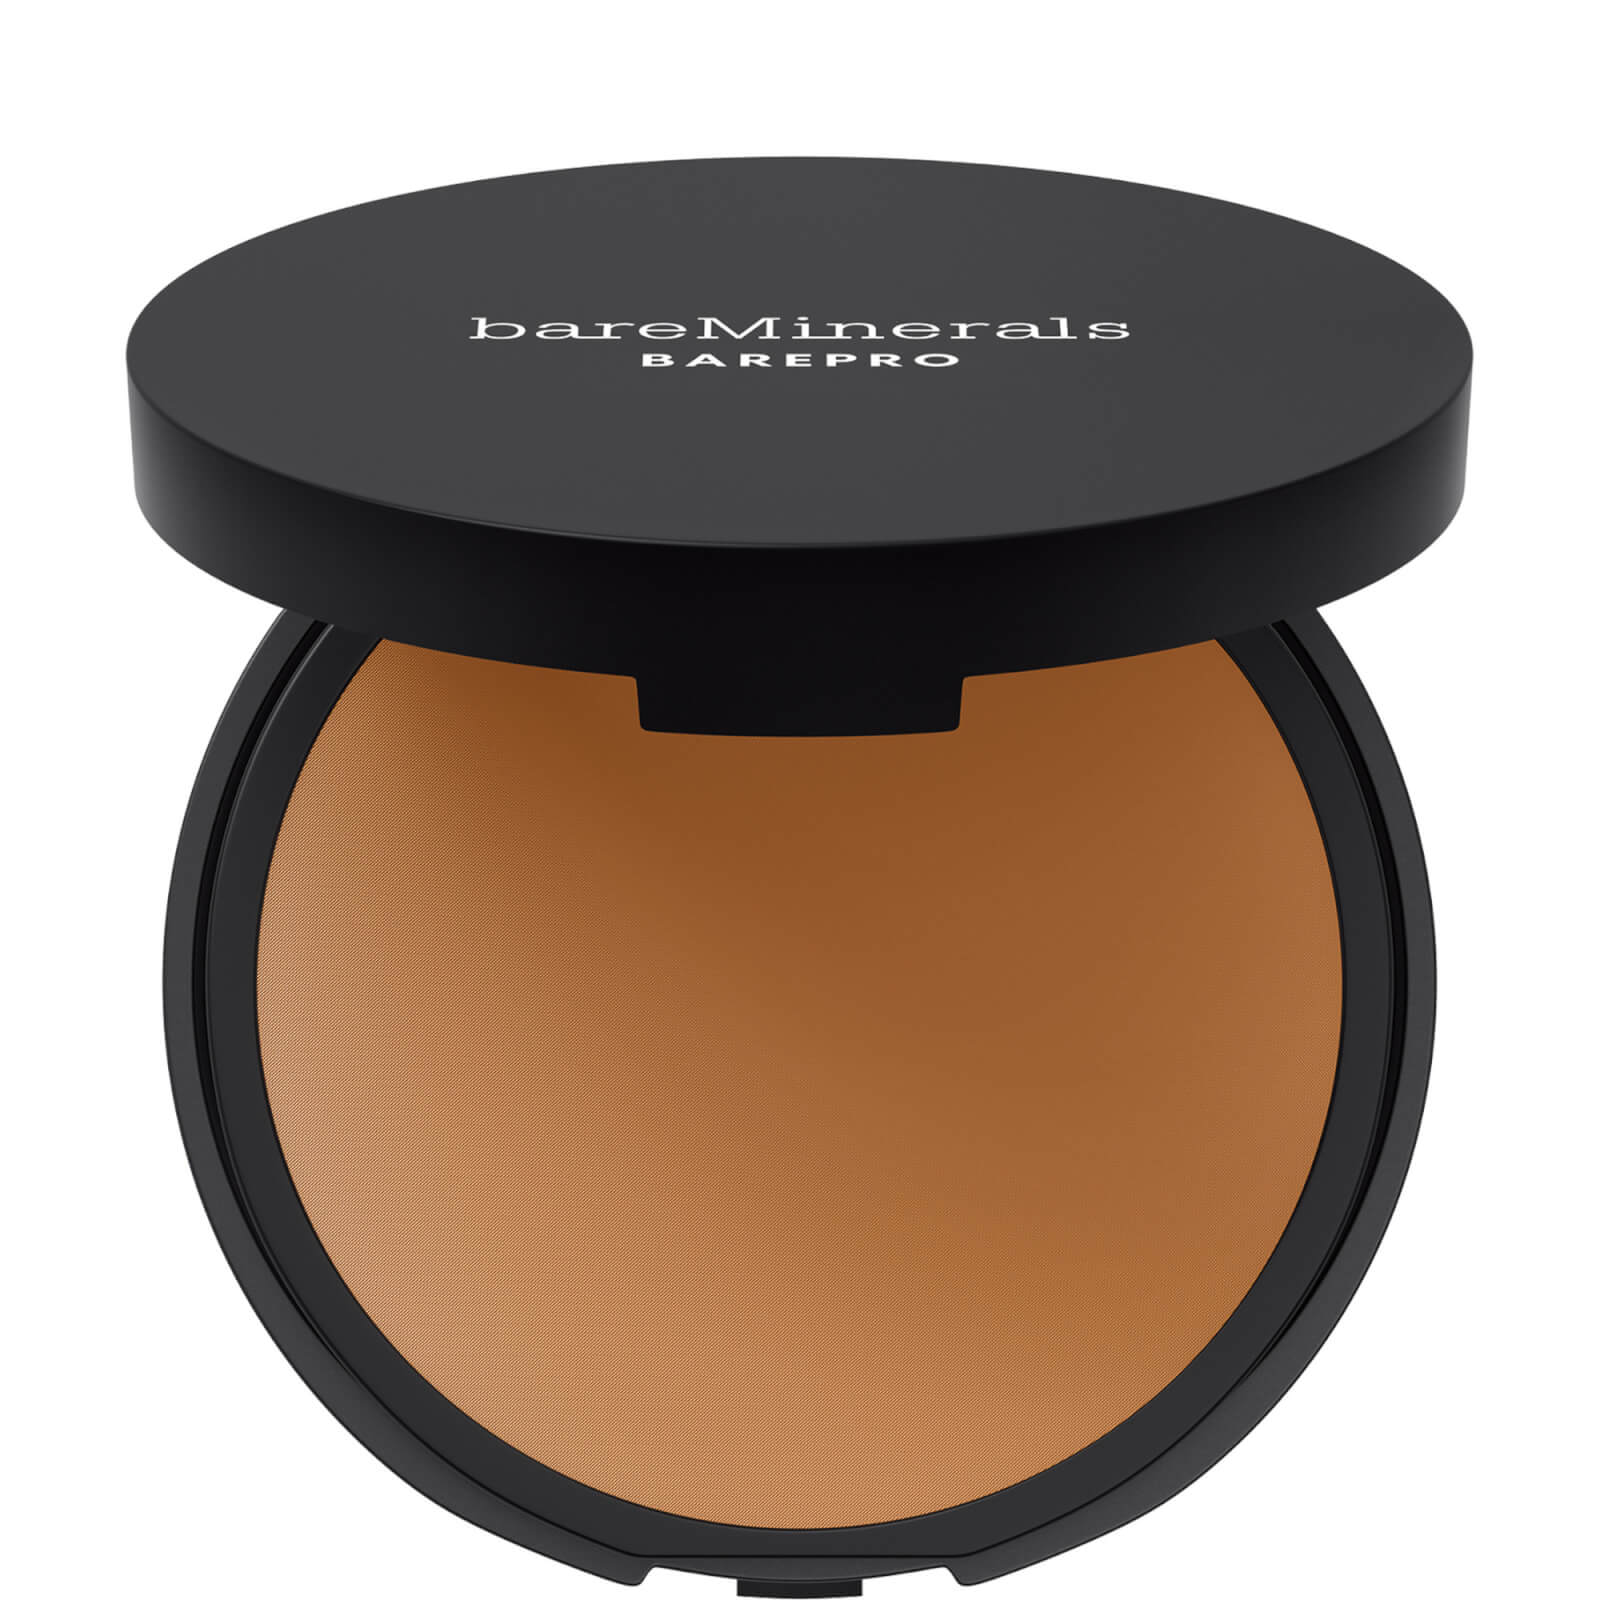 Image of bareMinerals BAREPRO Pressed 16 Hour Foundation 10g (Various Shades) - Deep 50 Neutral